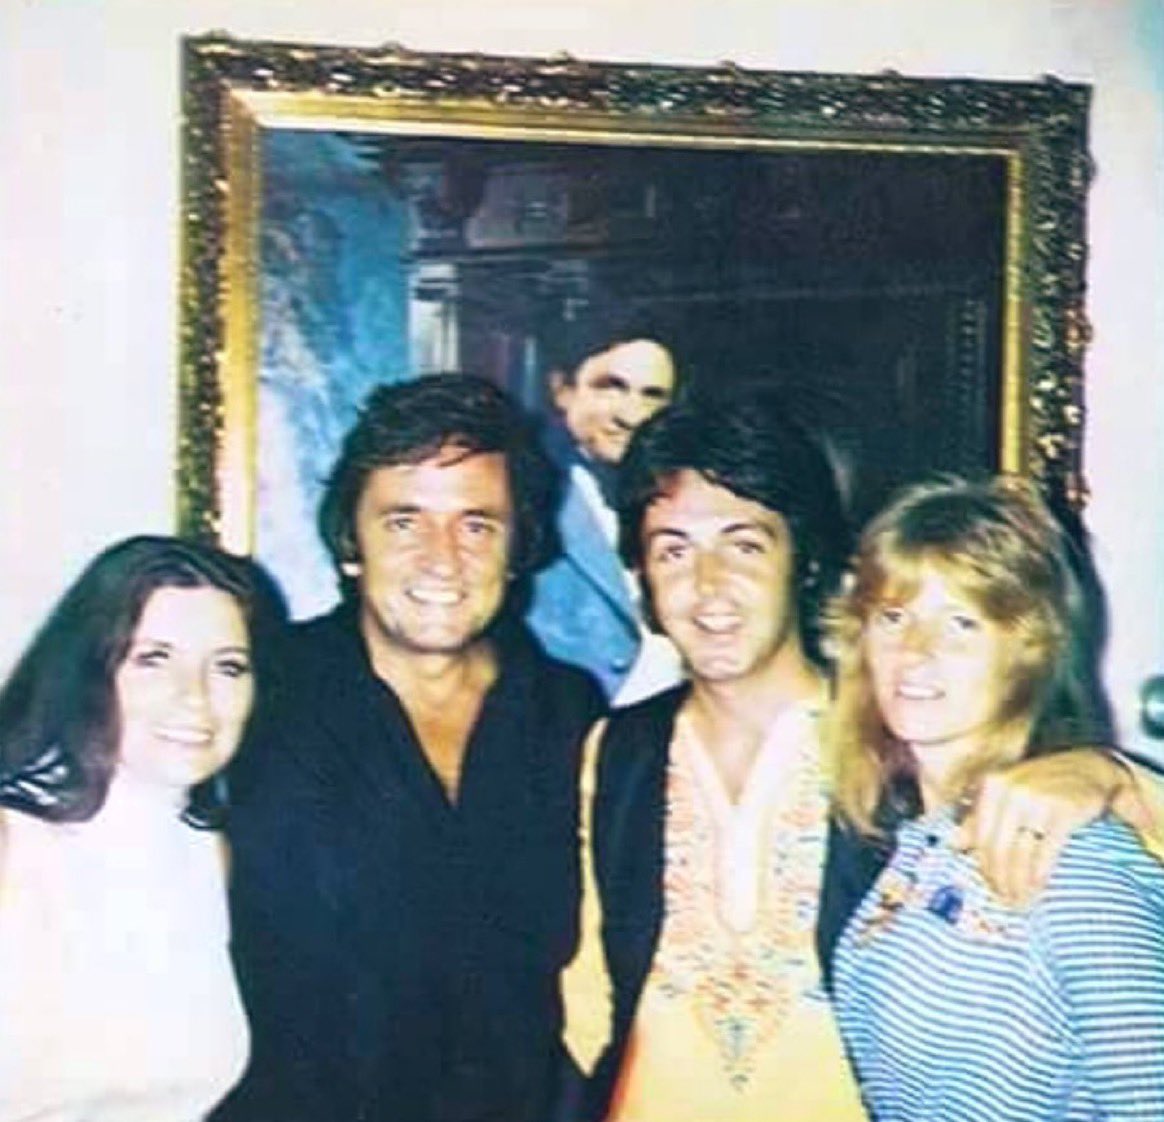 I didn’t know “Johnny Cash and Paul McCartney posing with their wives in front of a fucking portrait of Johnny Cash” was a thing that needed to happen until right now but thank god it did.